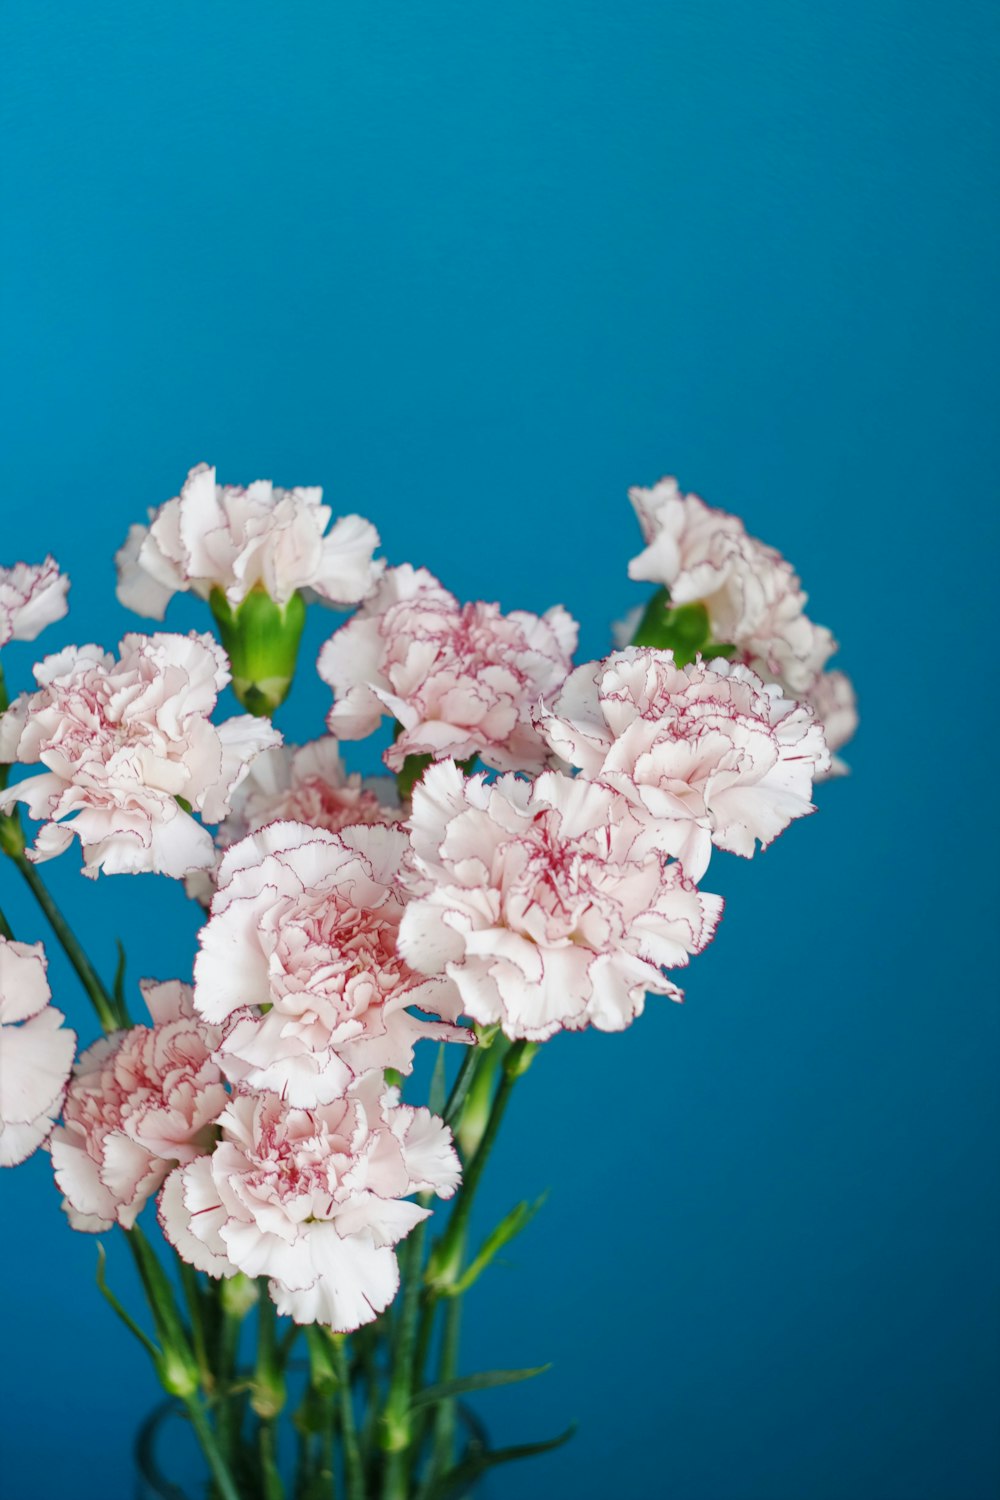 a vase filled with pink flowers against a blue background